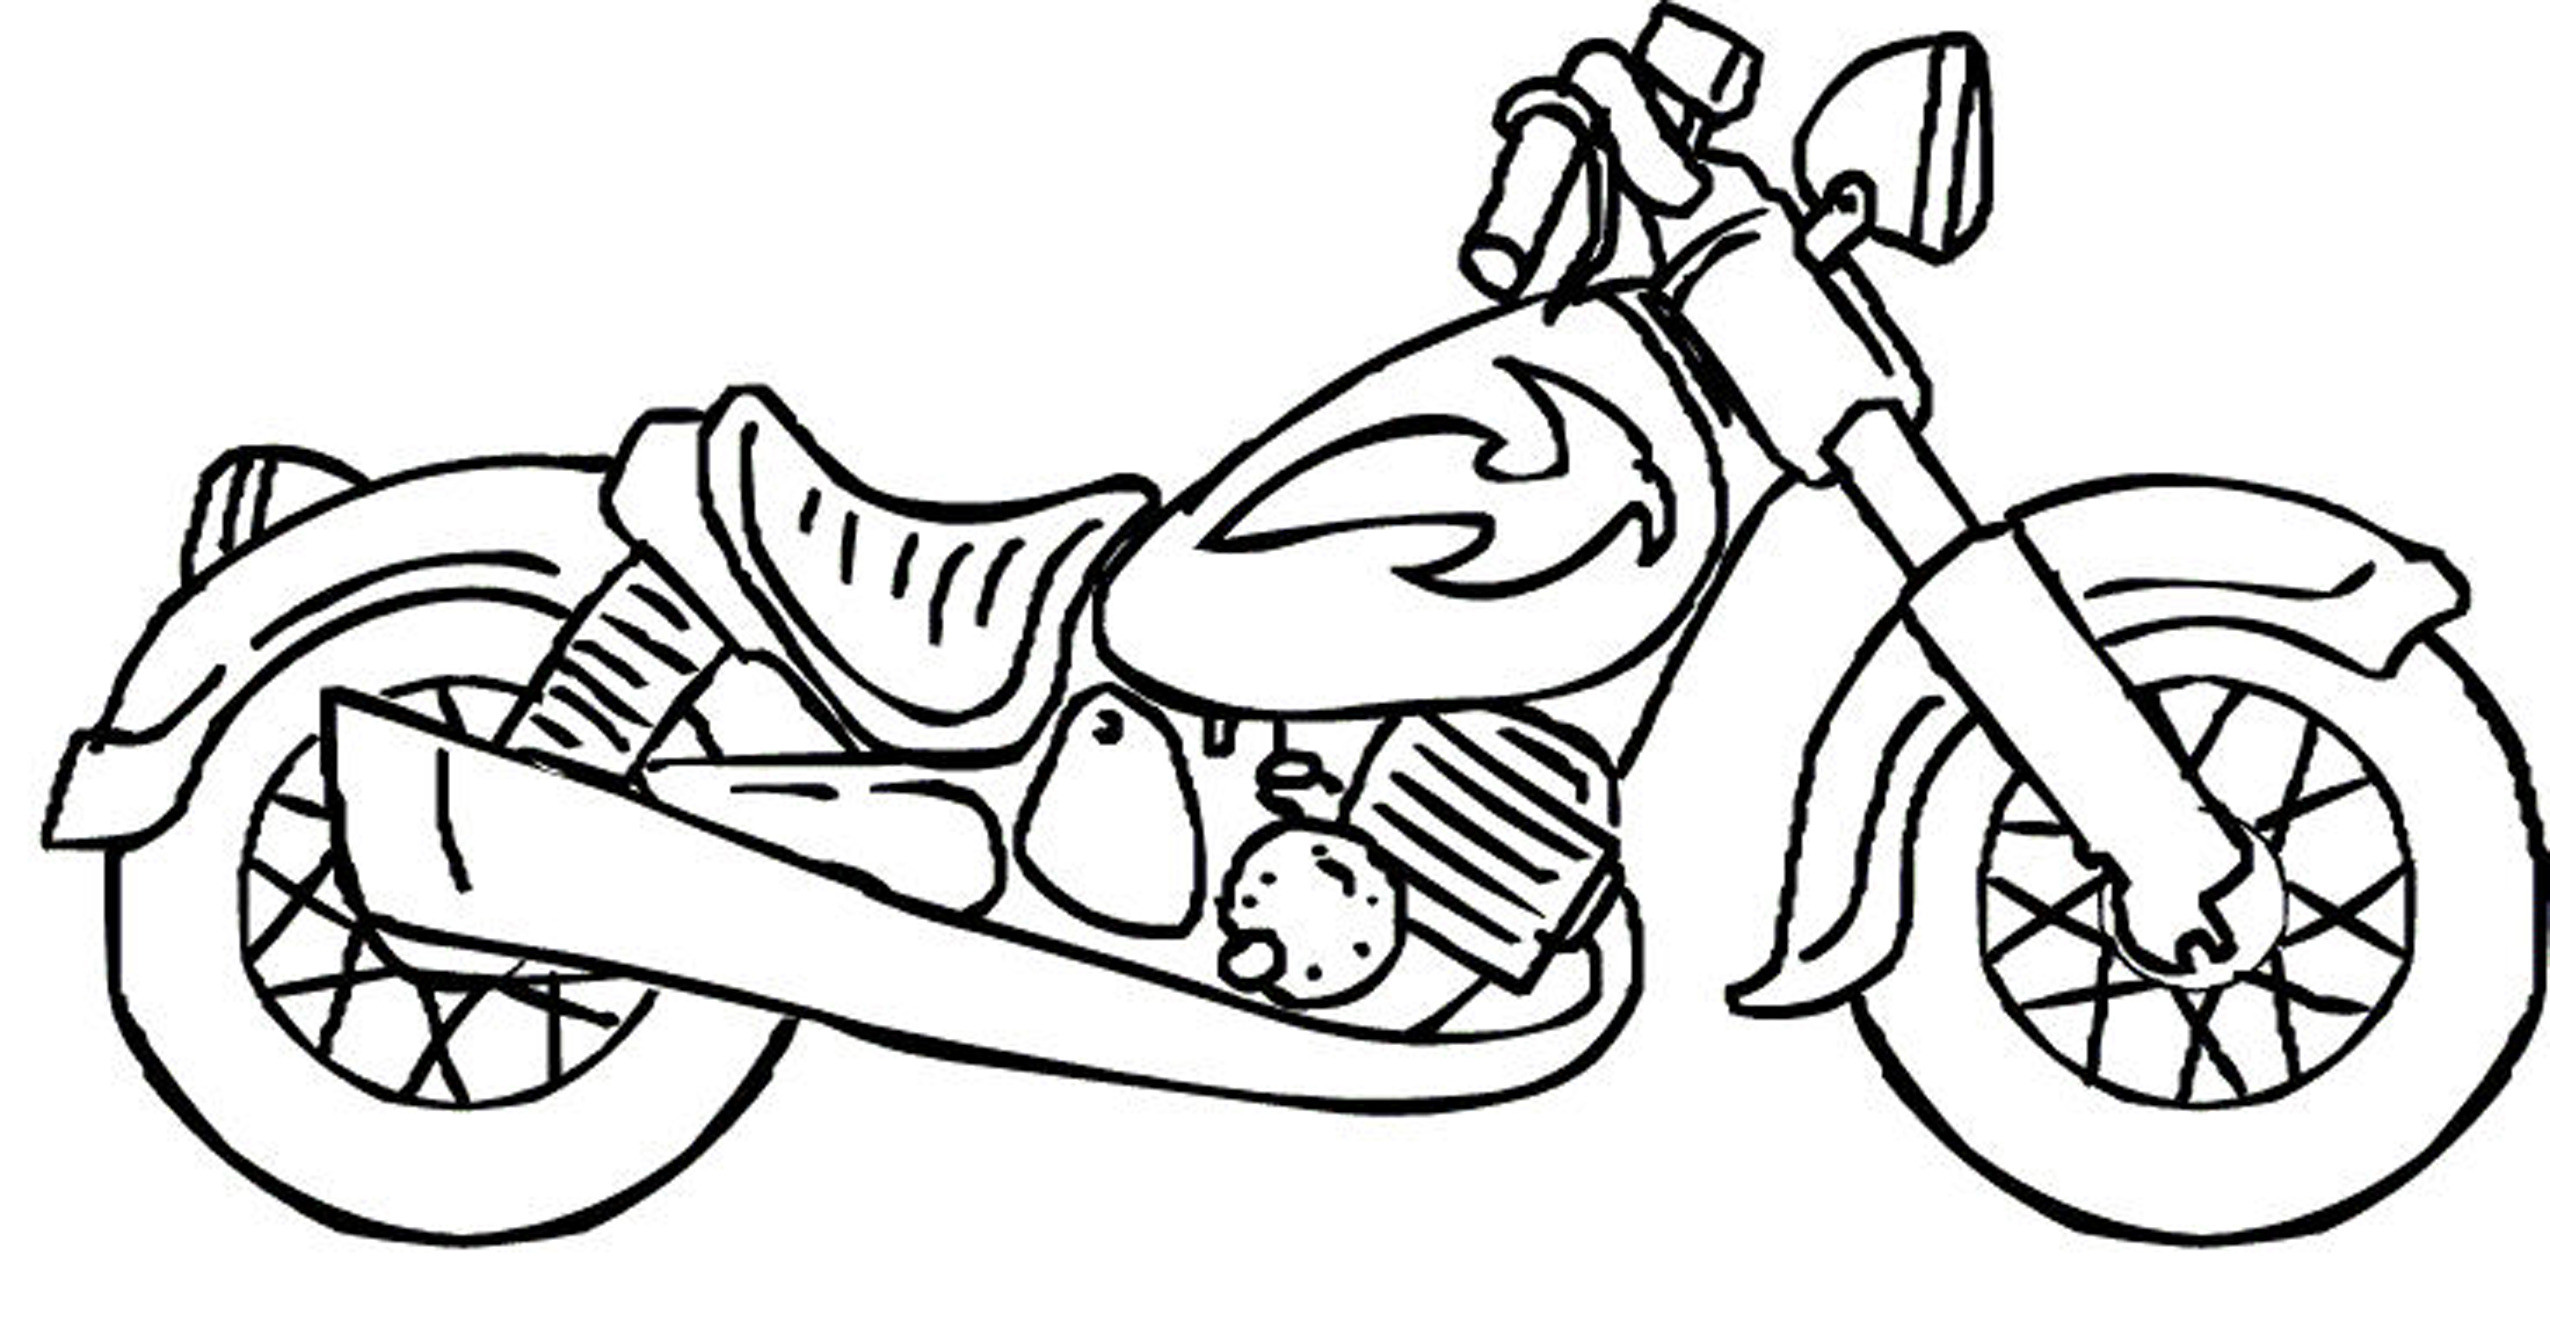 Cool Coloring Sheet For Boys
 cool coloring pages for boys Gianfreda